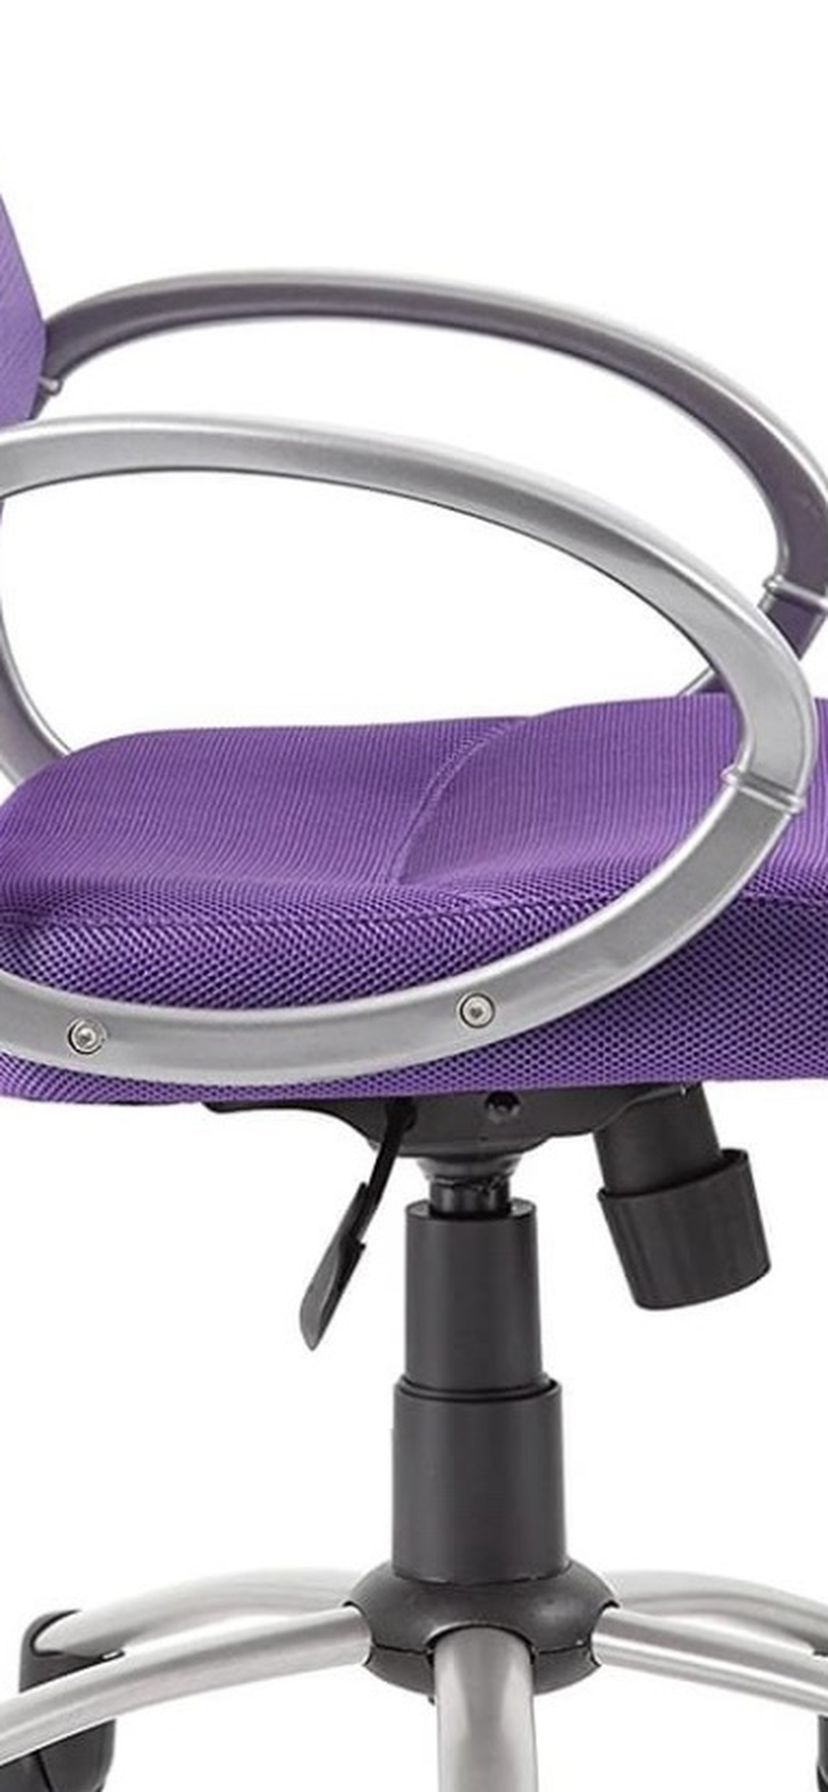 Boss Office Products Mesh Back Task Chair with Pewter Finish in Purple